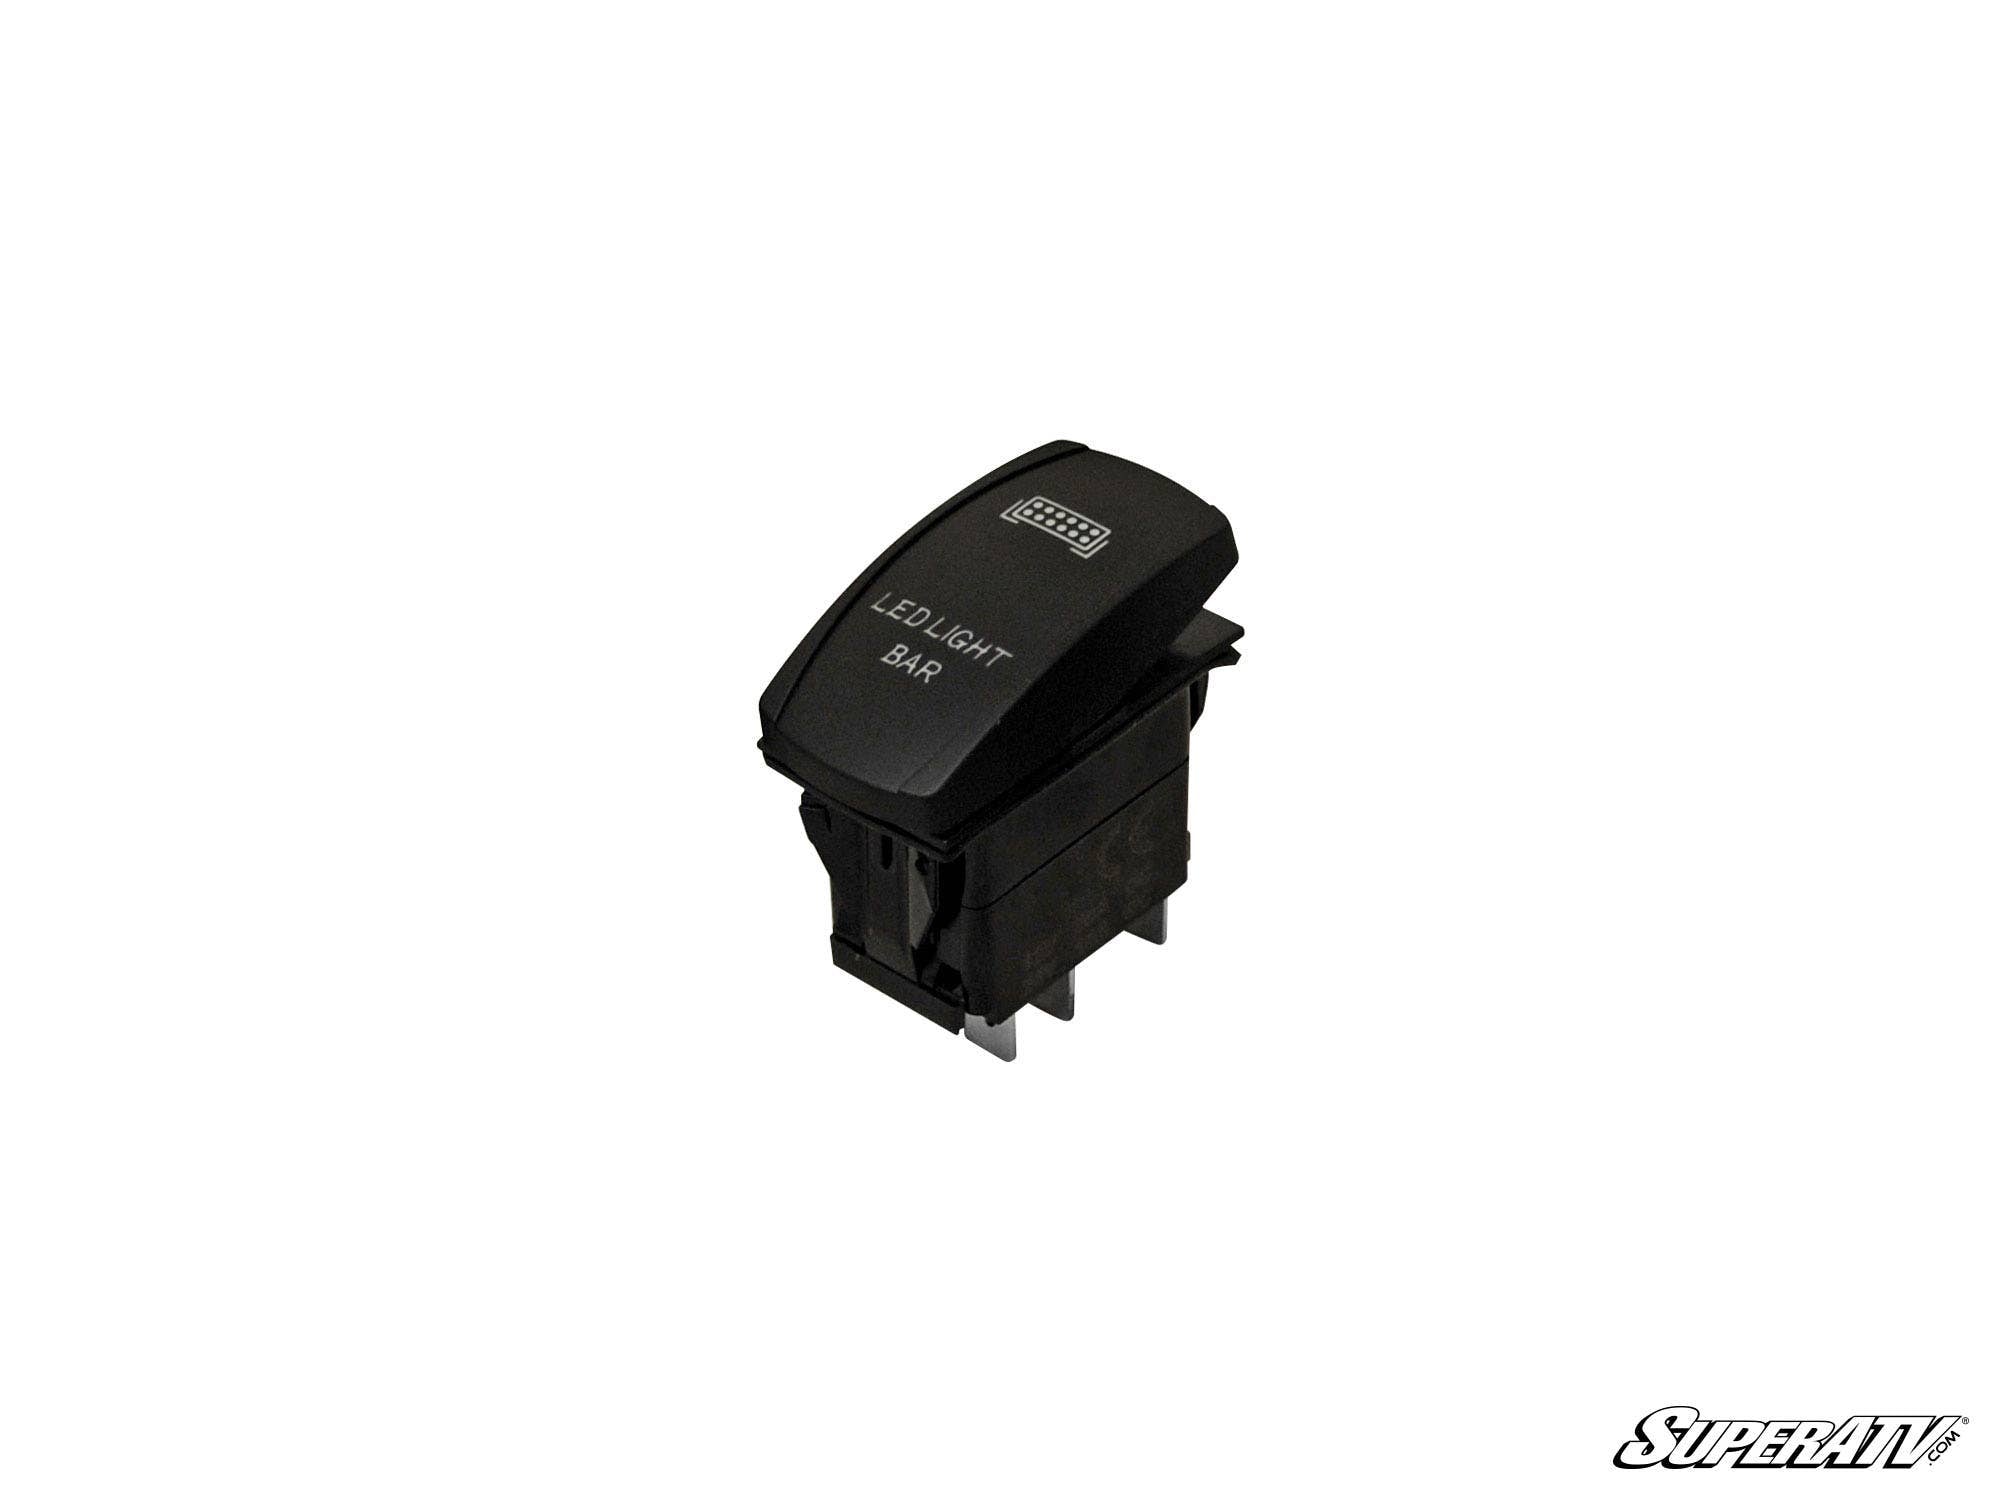 12V / 20A Off-Road Rocker Switches